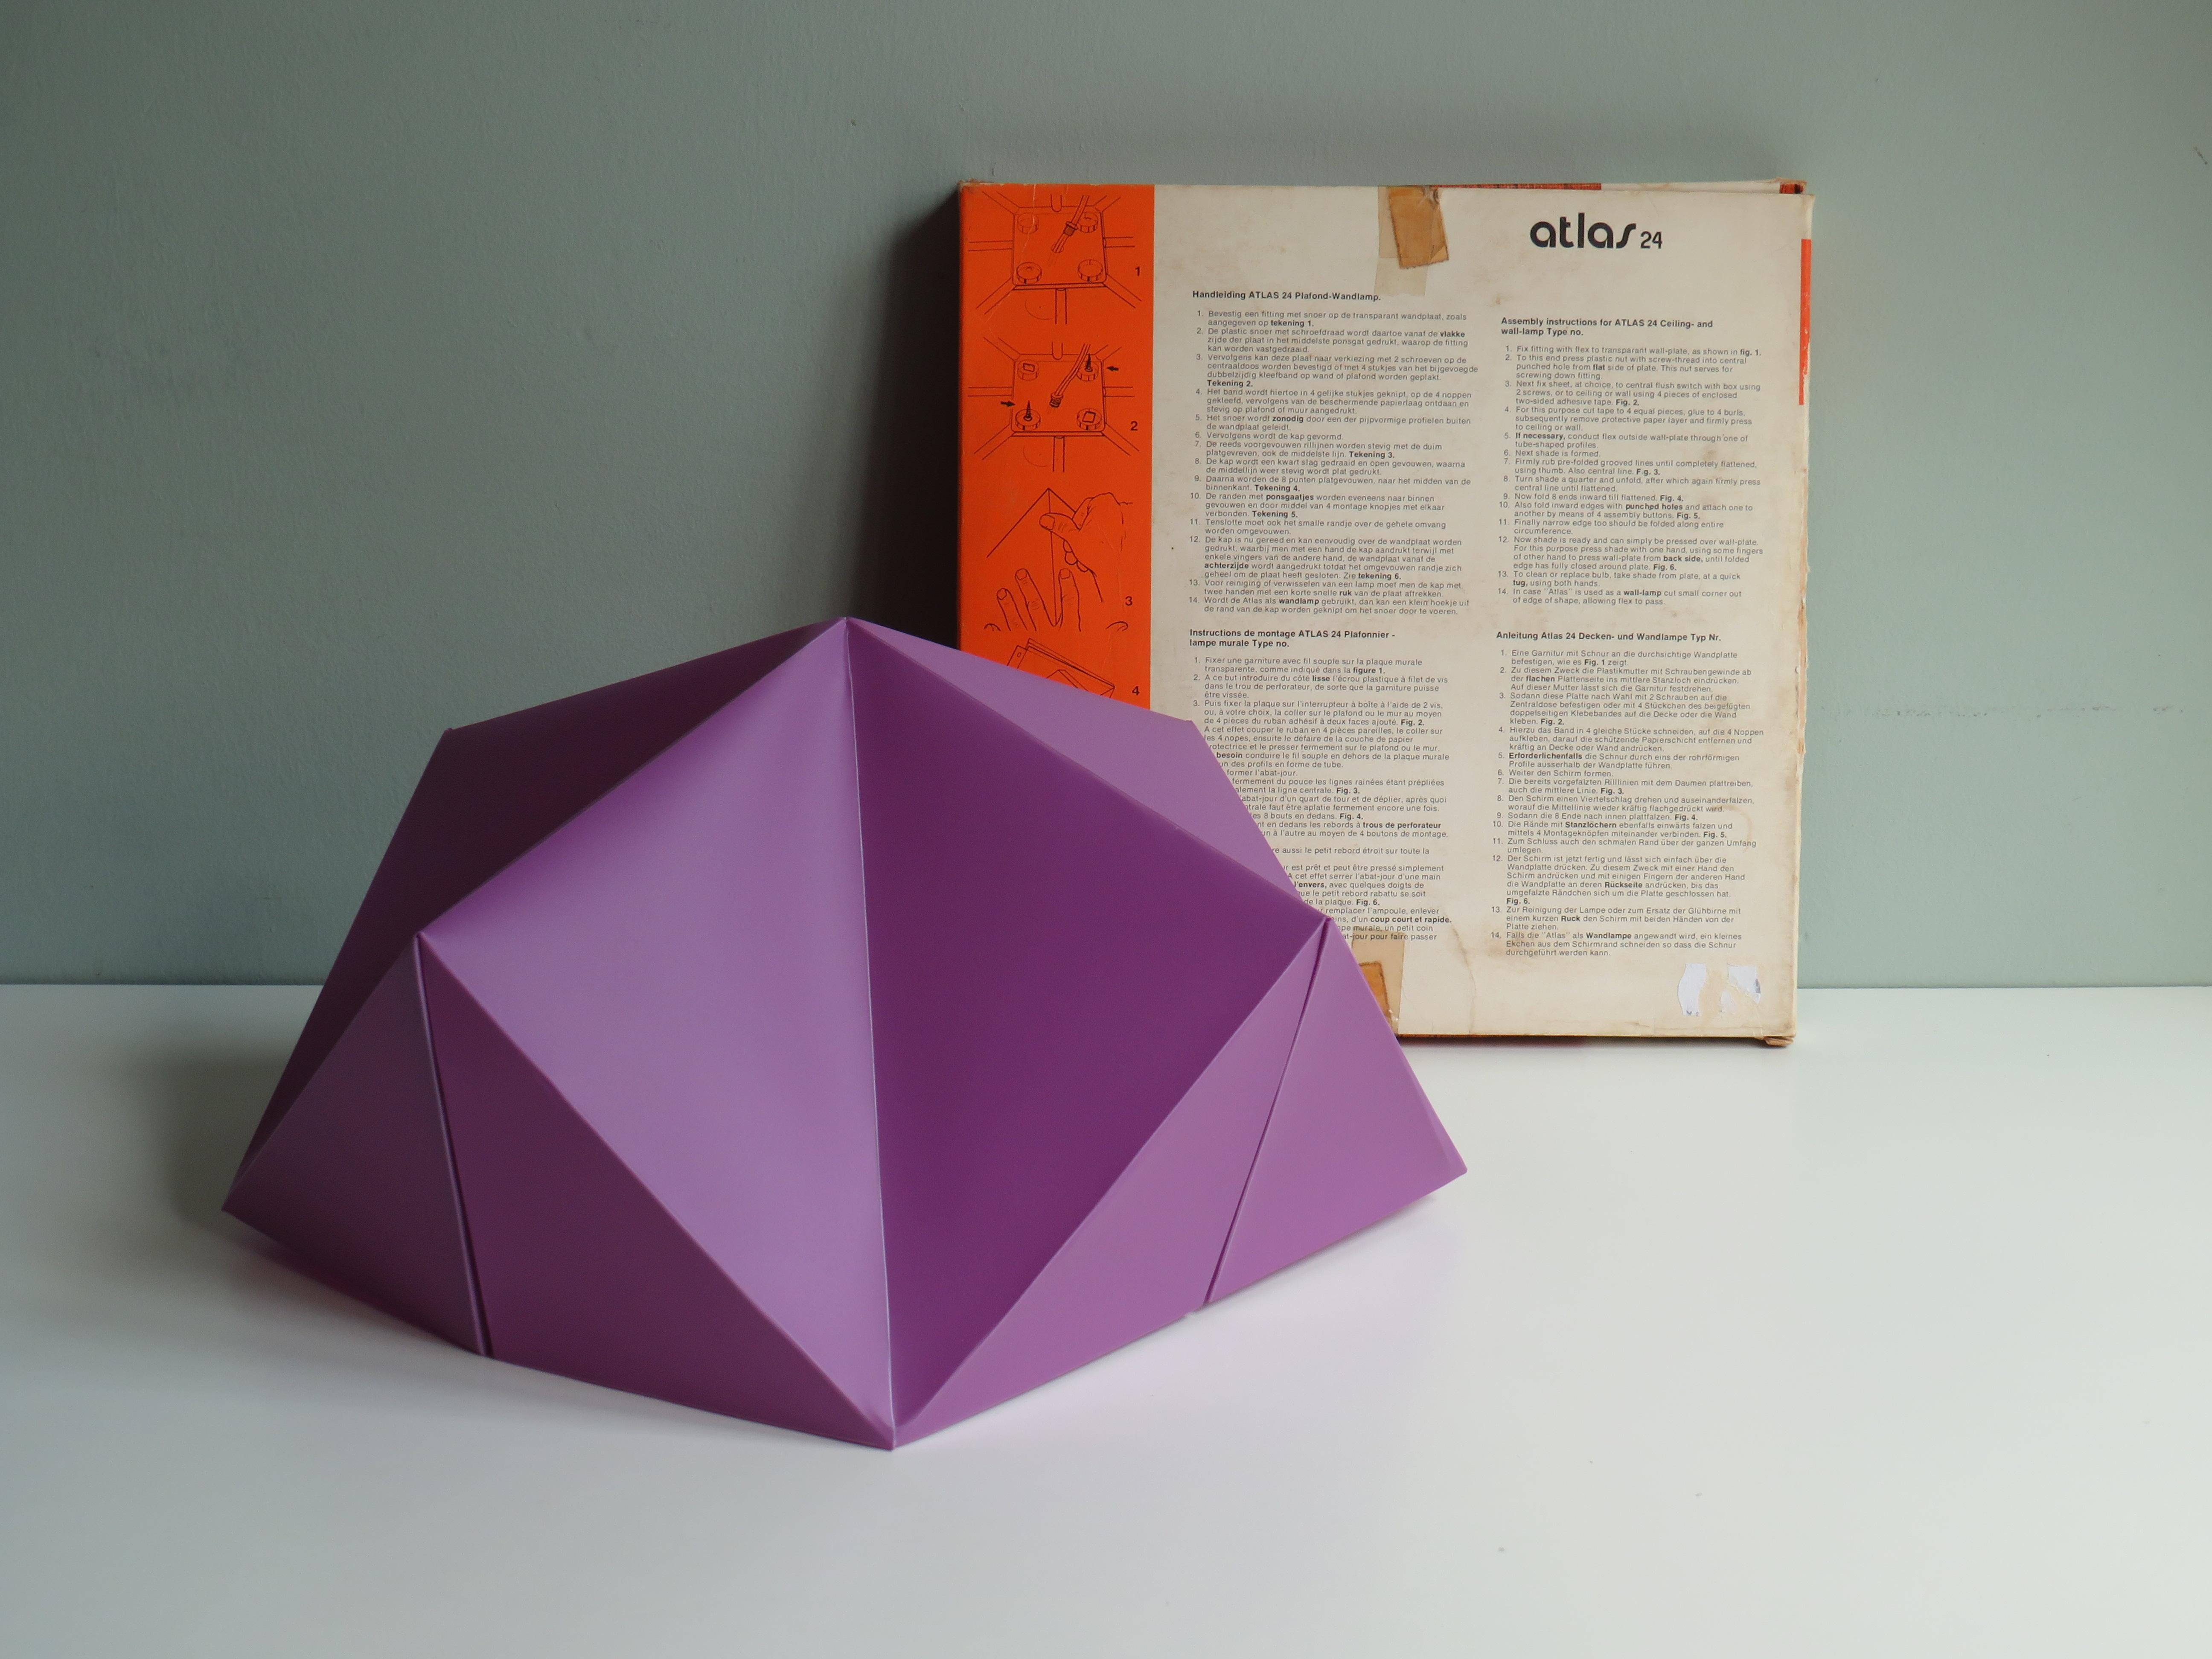 Plastic Ceiling Wall Lamp Atlas 24 by Woja, the Netherlands 1960-1970 In Good Condition For Sale In Herentals, BE